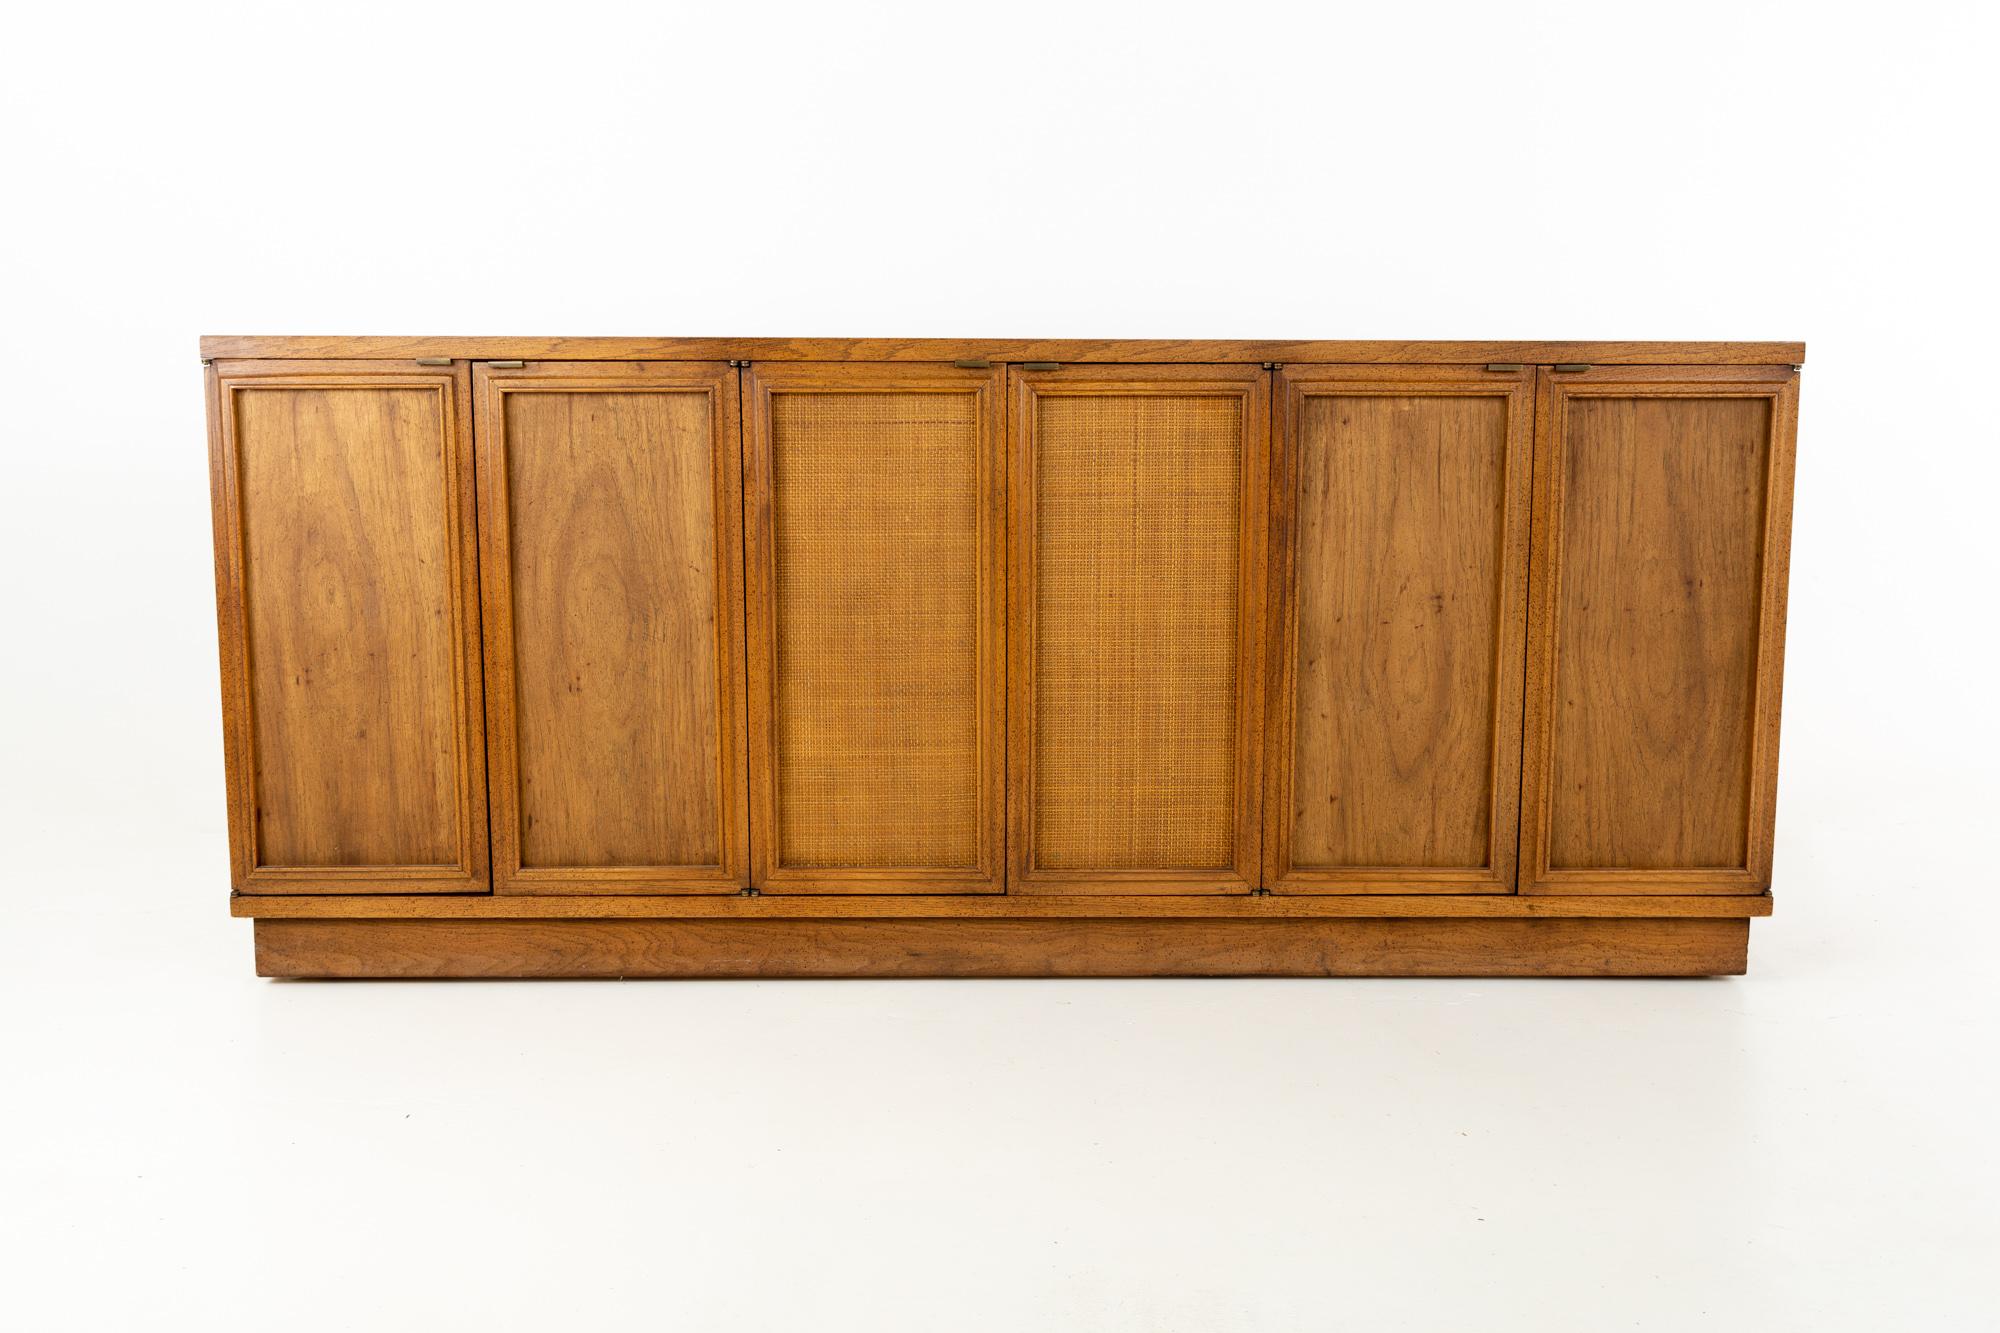 Bernhardt furniture Mid Century cane front credenza buffet
This piece is 70 wide x 17.75 deep x 29.5 inches high

This price includes getting this piece in what we call restored vintage condition. That means the piece is permanently fixed upon